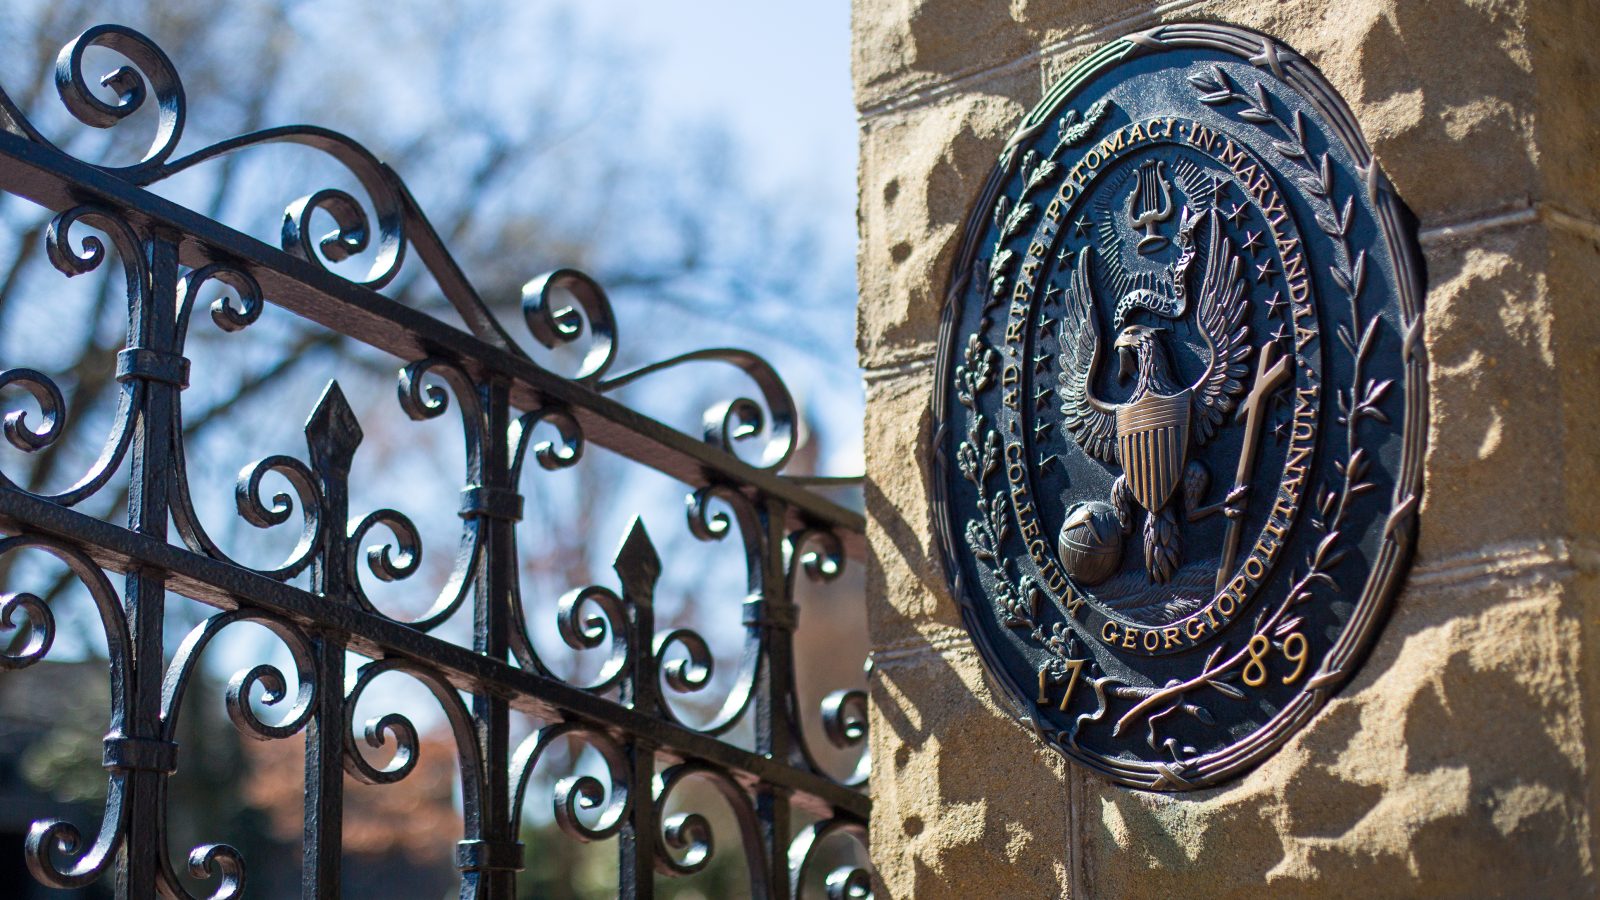 Georgetown University gate and seal